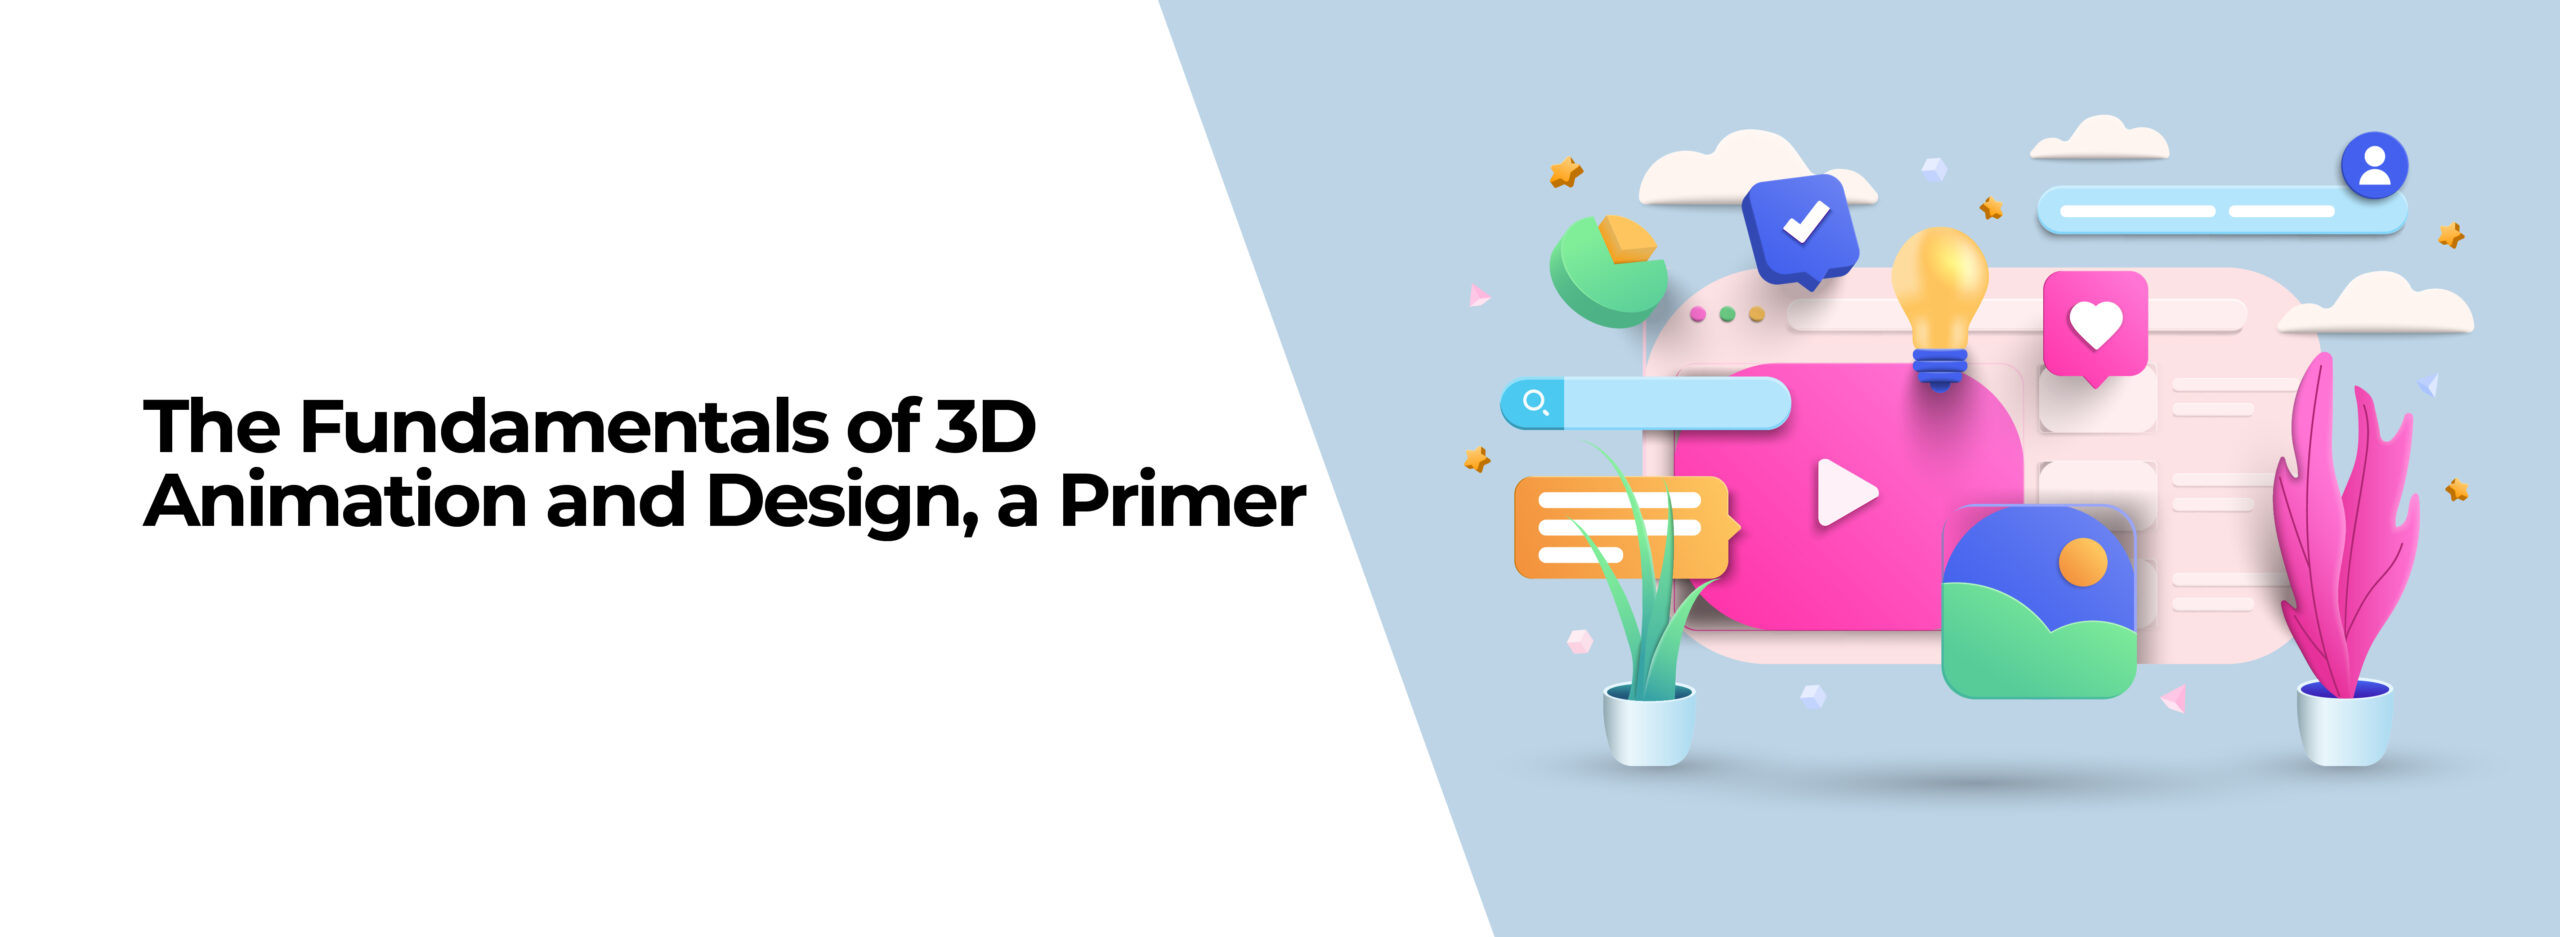 The Fundamentals of 3D Animation and Design, a Primer